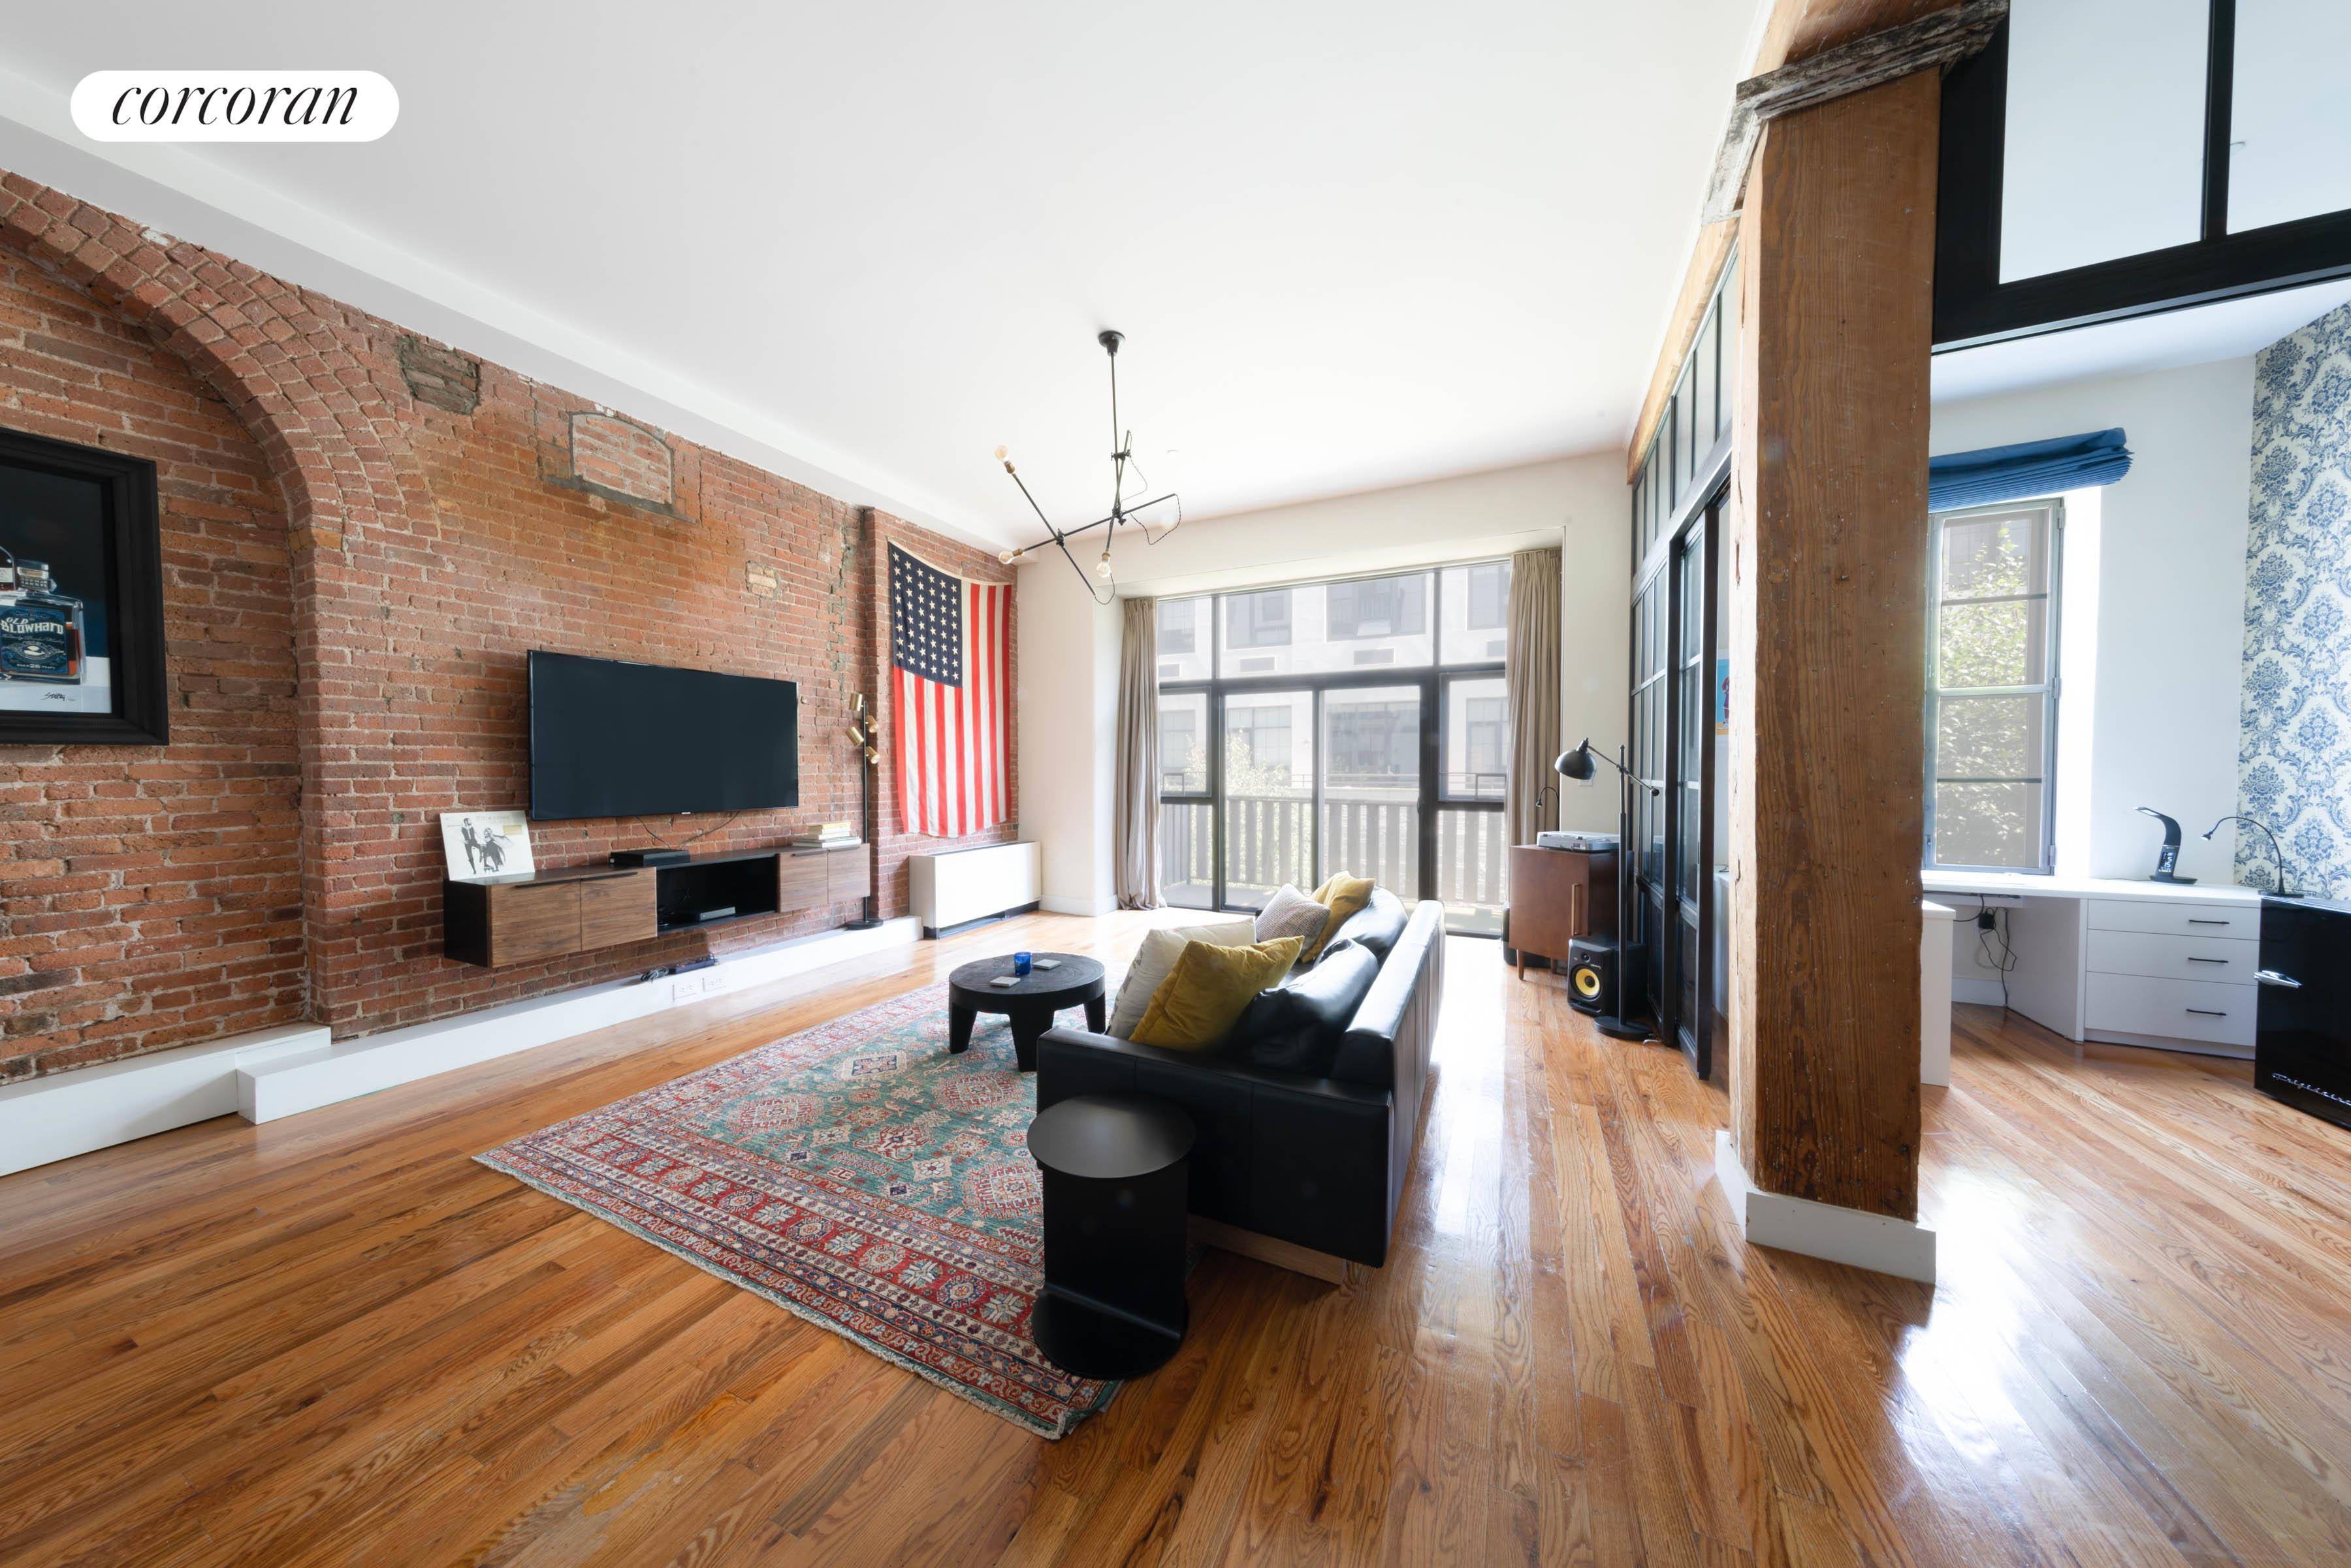 Airy loft living at the desirable Mill building, experience living in this historical gem built in 1910 for Hinds amp ; Ketcham, transformed in 2007 into breathtaking residences this fabulous ...